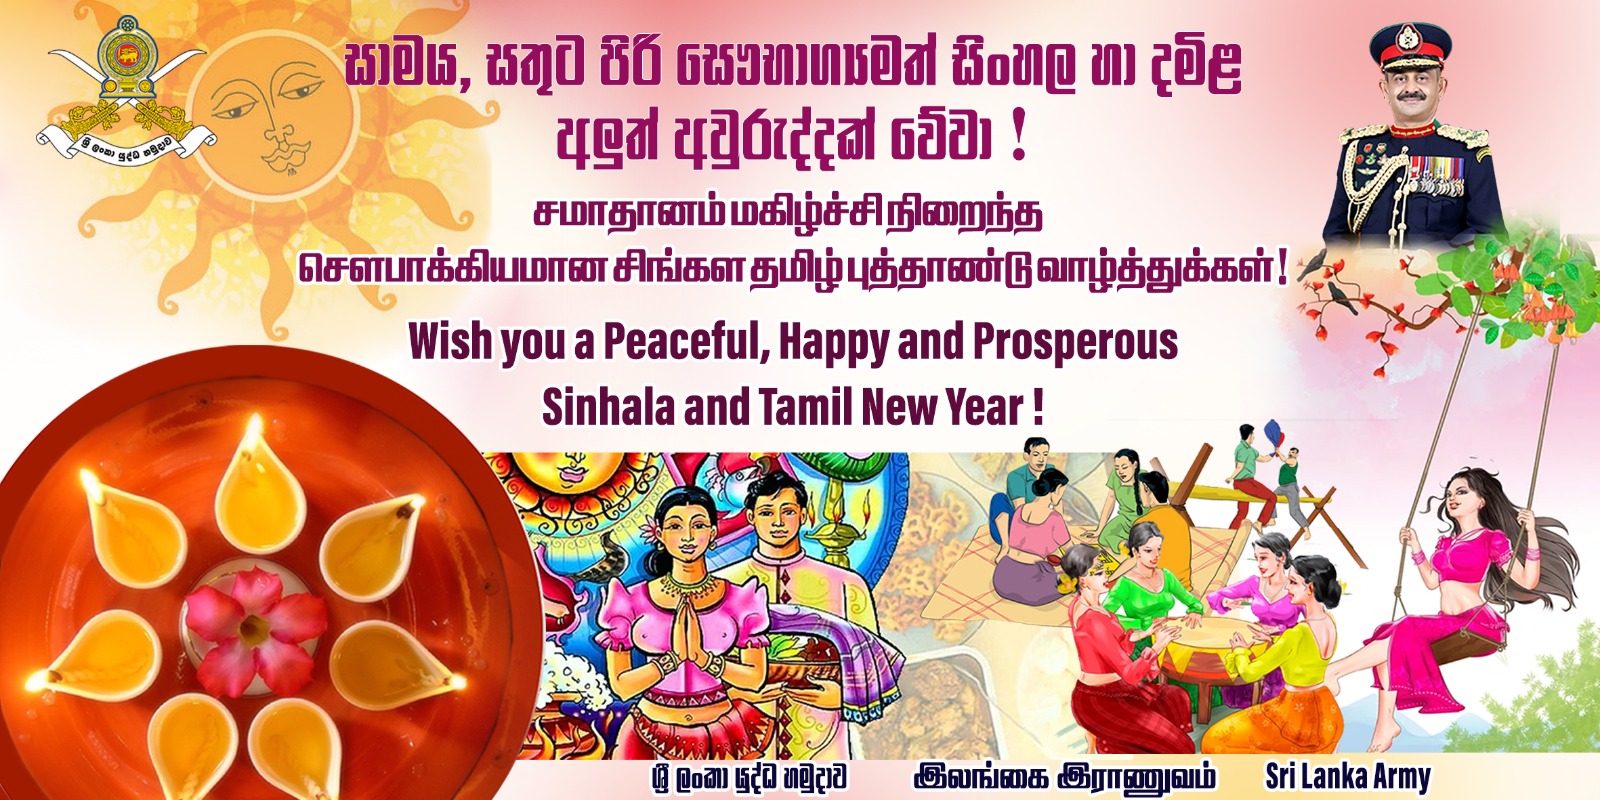 May New Year Usher in Prosperity, Happiness & Peace to All !